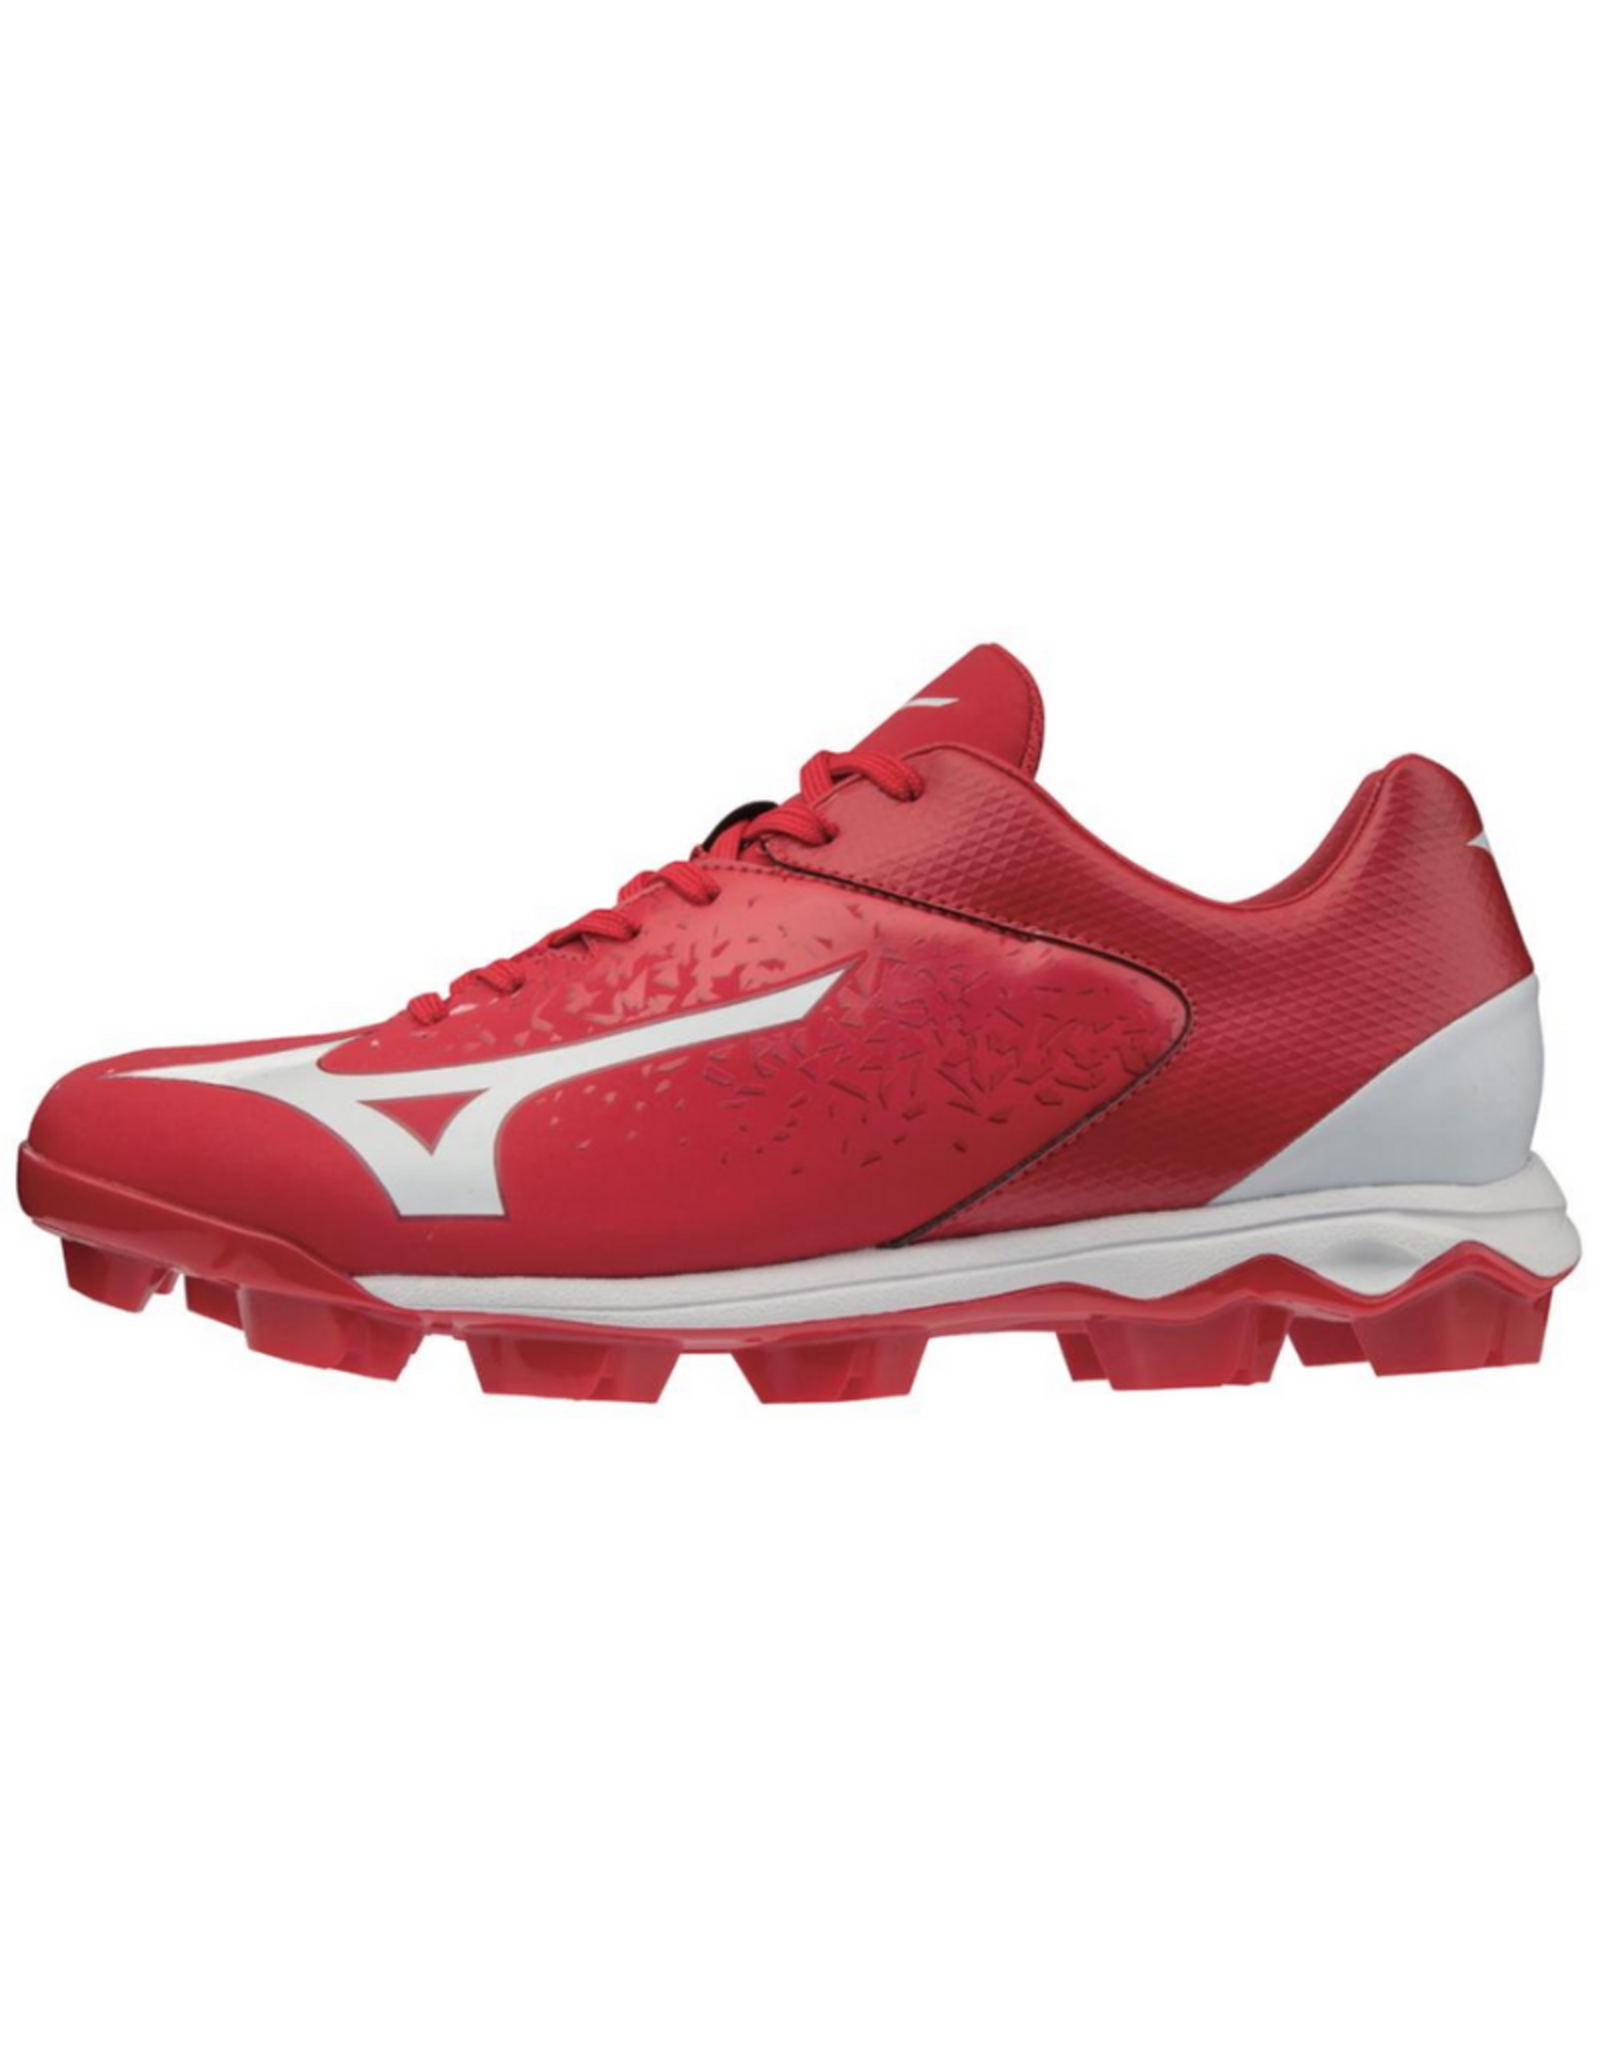 Mizuno Wave Select 9 Low Men's Baseball Cleat Red/White